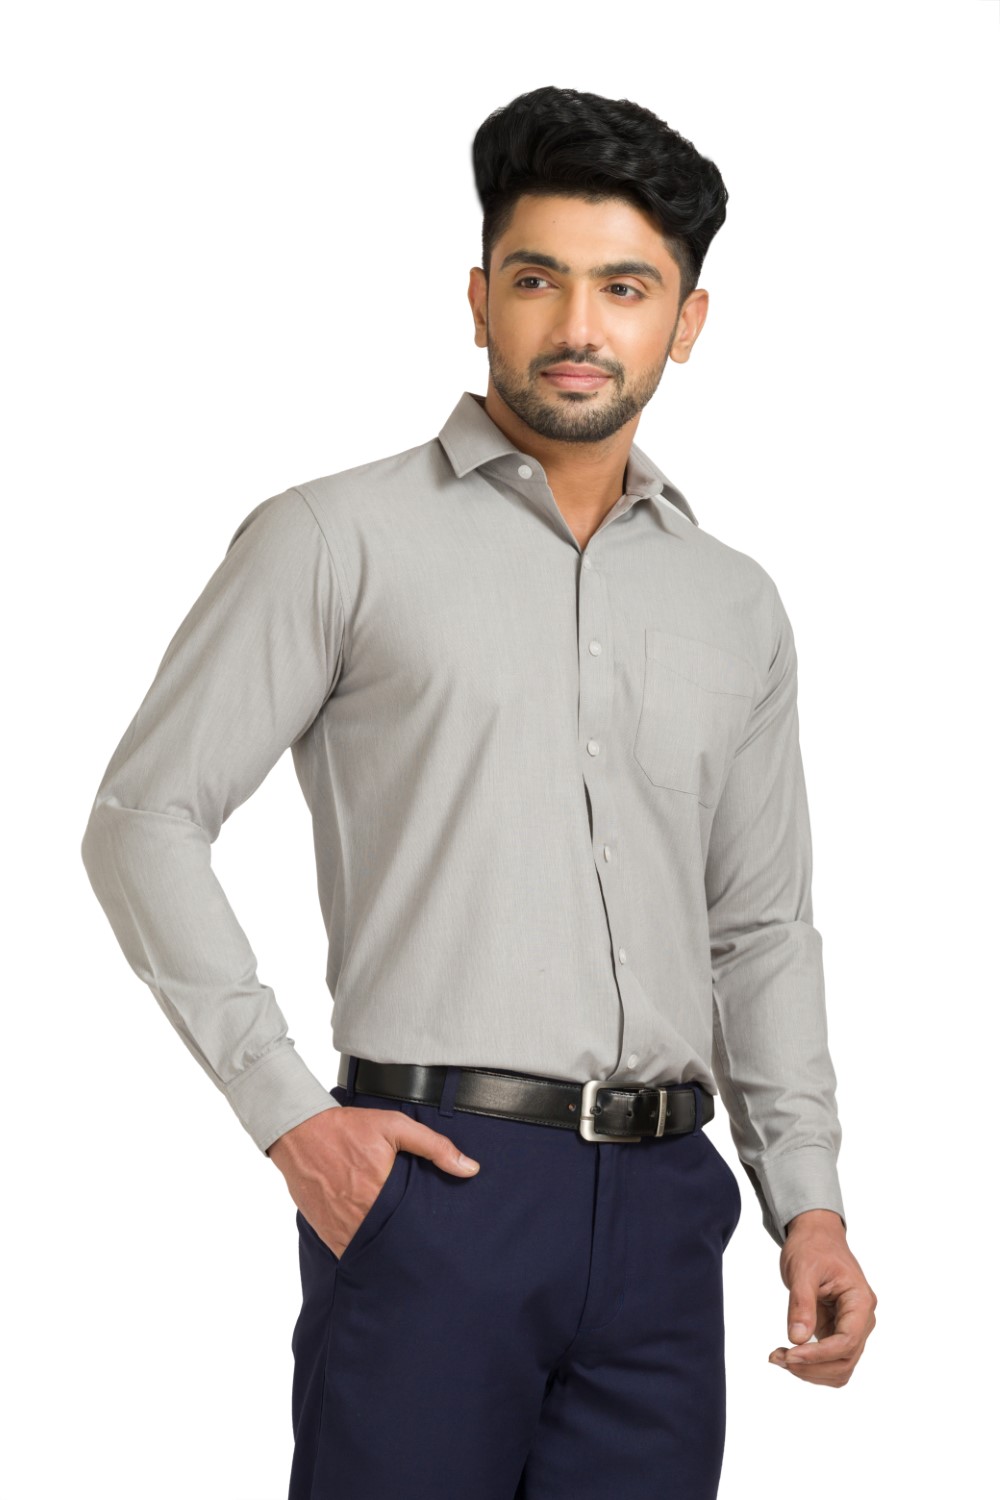 Classic textured Light Grey Full Sleeve Cotton Blend Shirt With A Regular fit and easy maintenance.